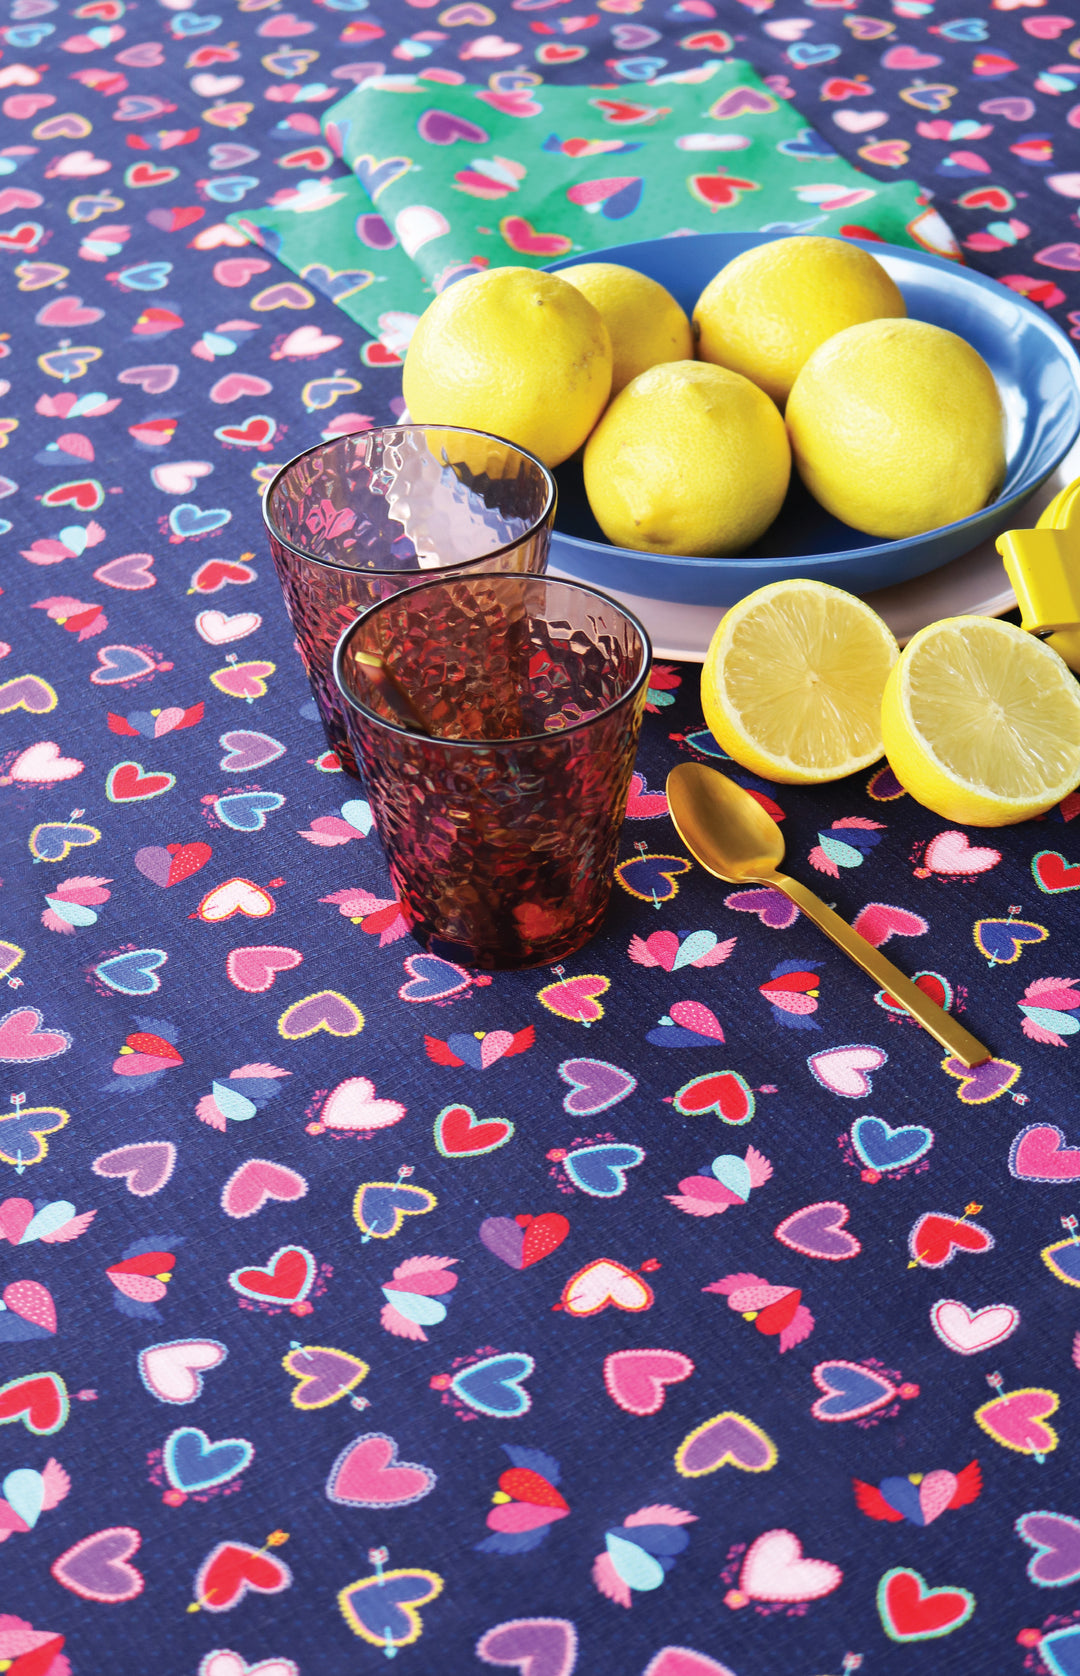 Tablecloth Large in queen of hearts navy